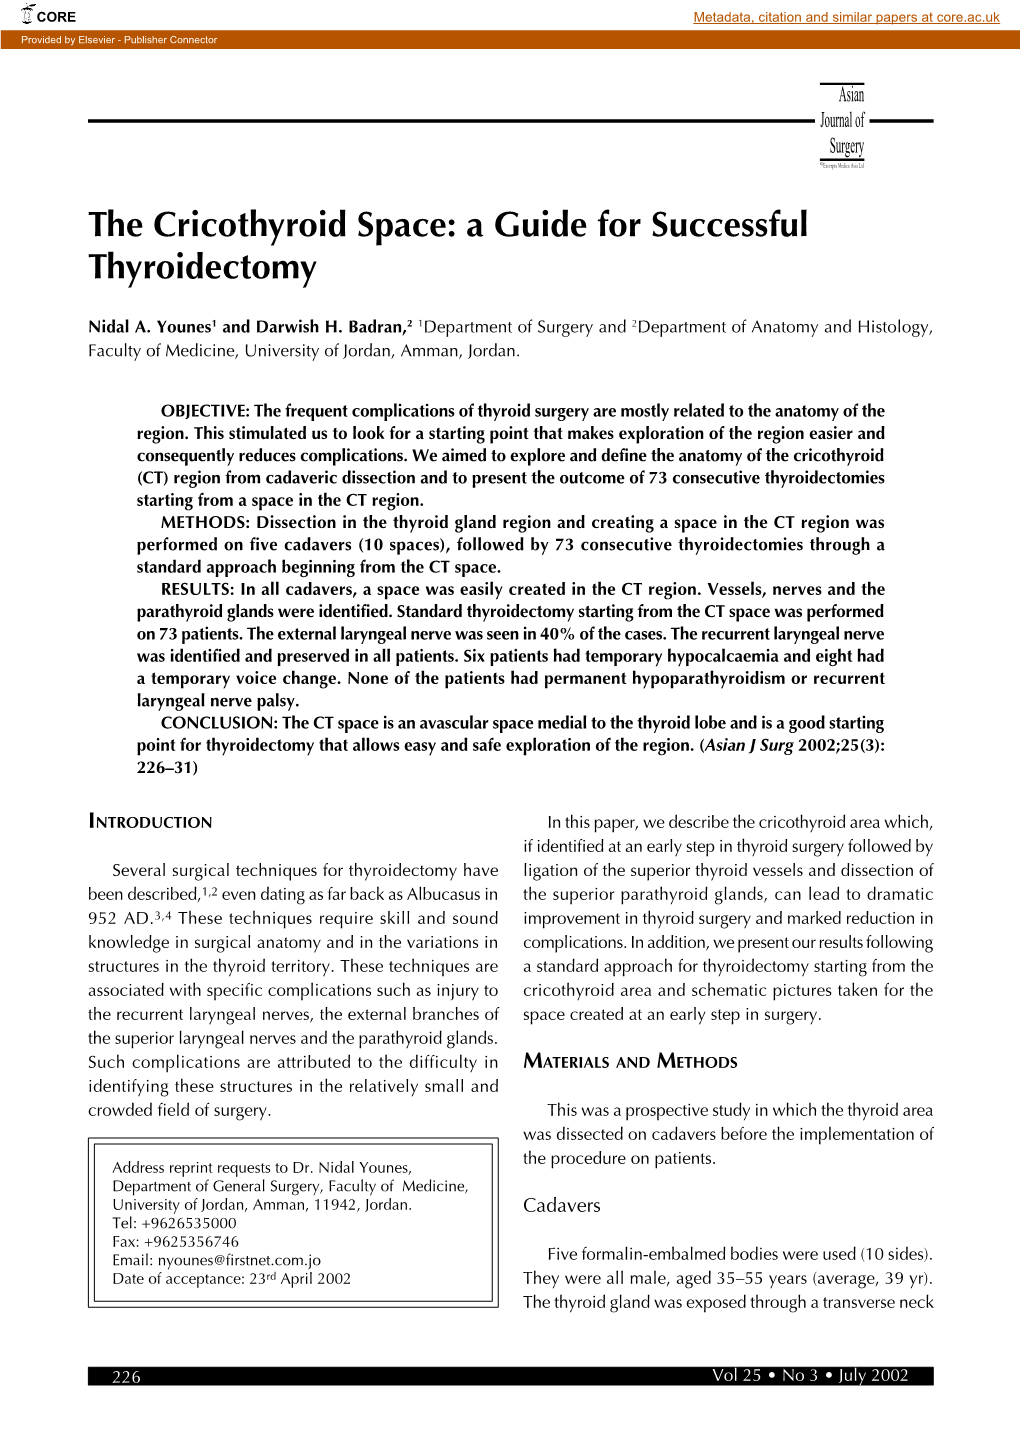 The Cricothyroid Space: a Guide for Successful Thyroidectomy